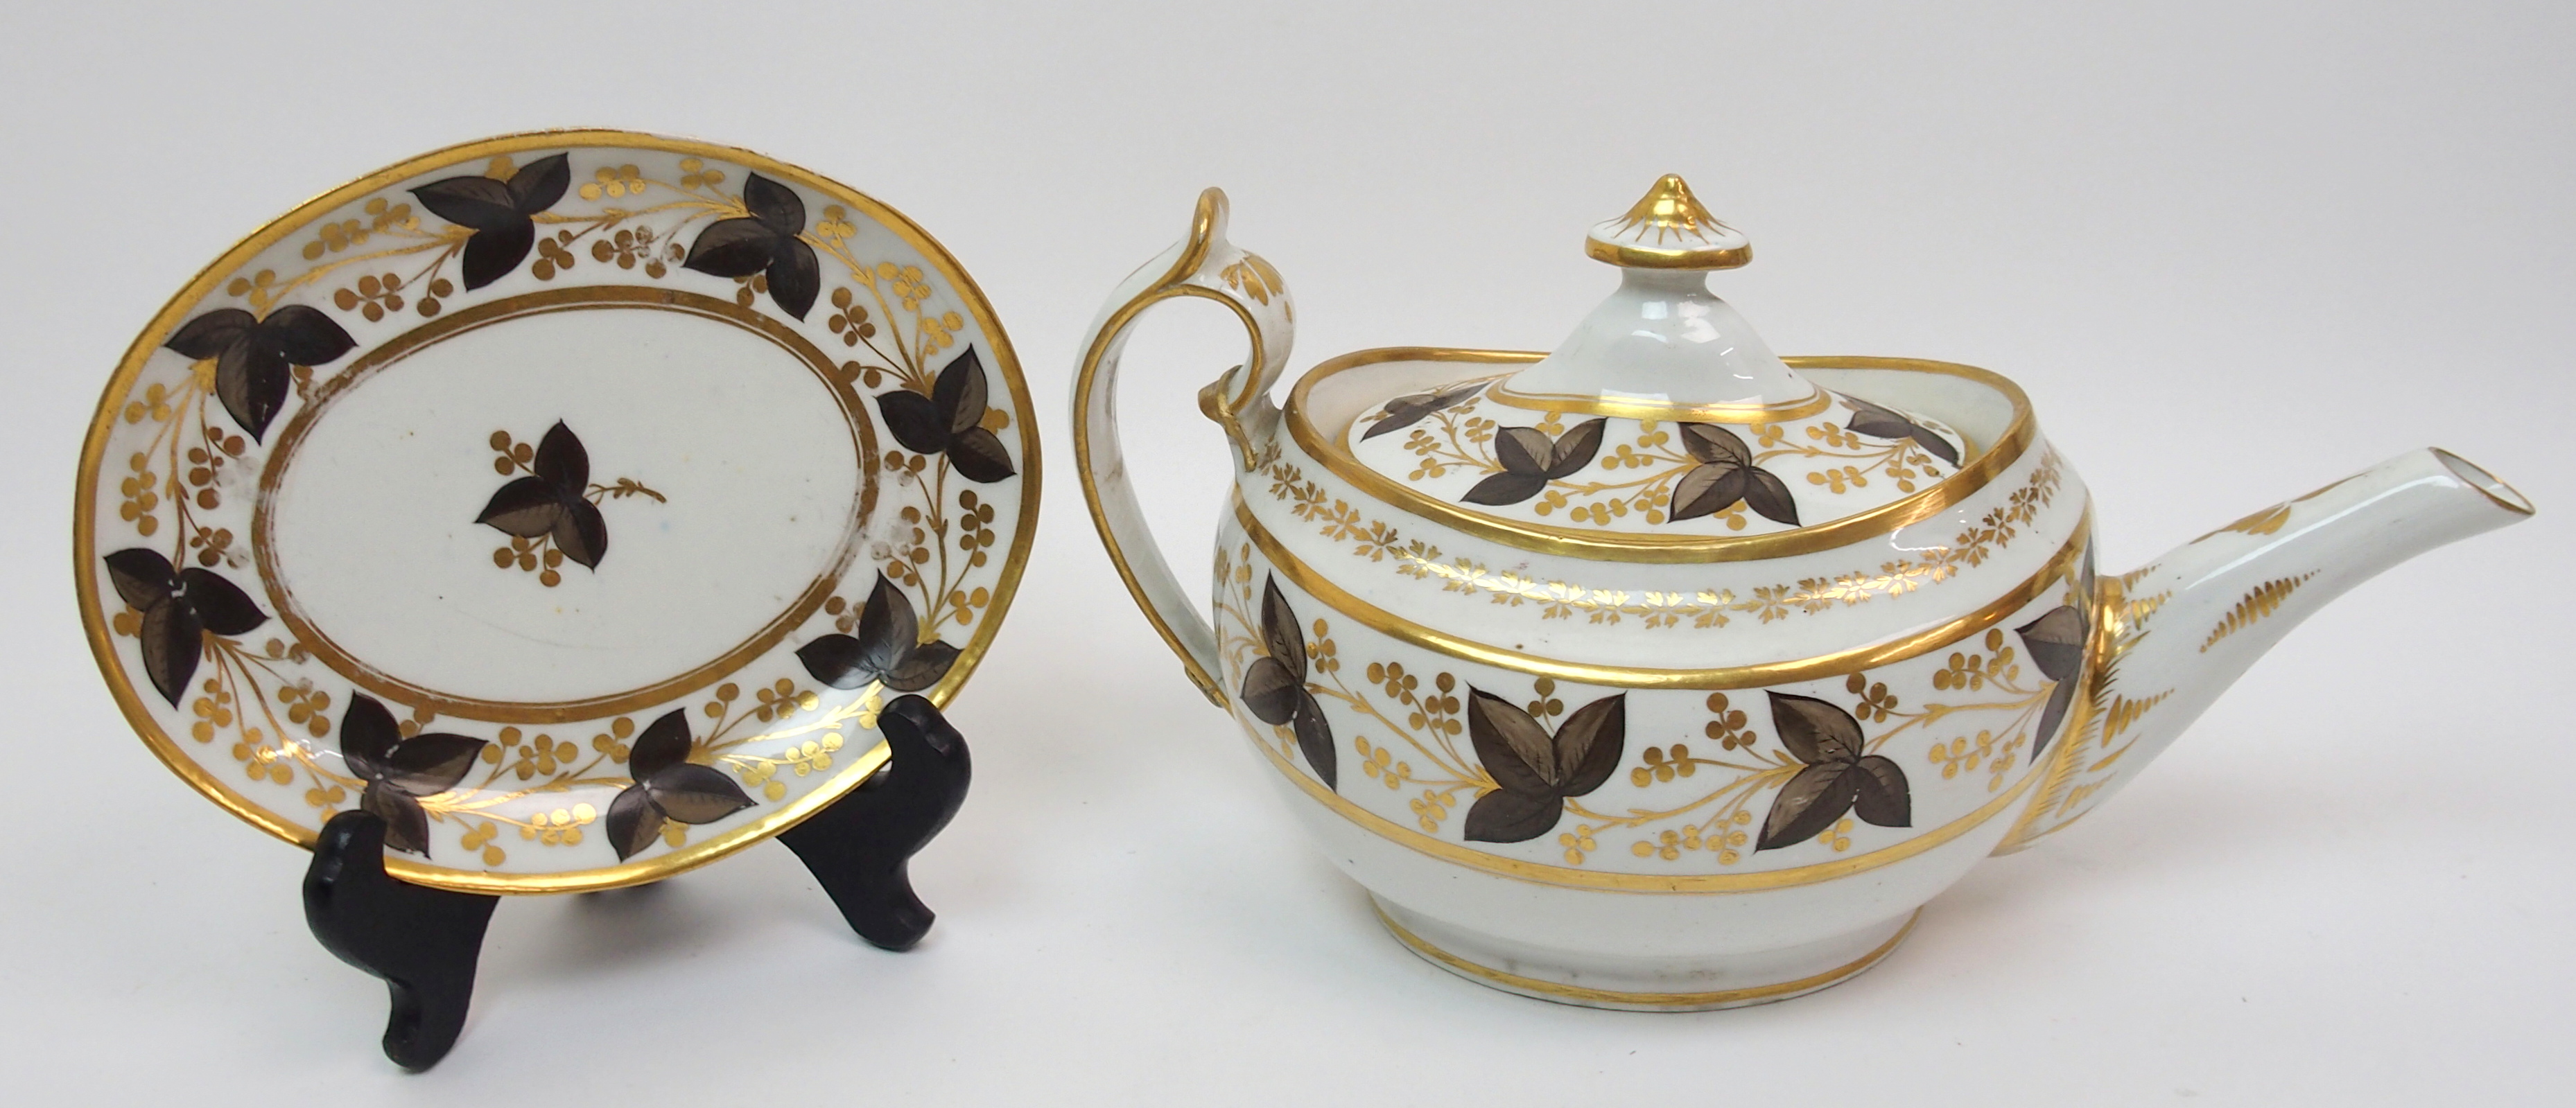 An early 19th Century Chamberlains Worcester porcelain part tea and coffee service painted in - Image 2 of 10